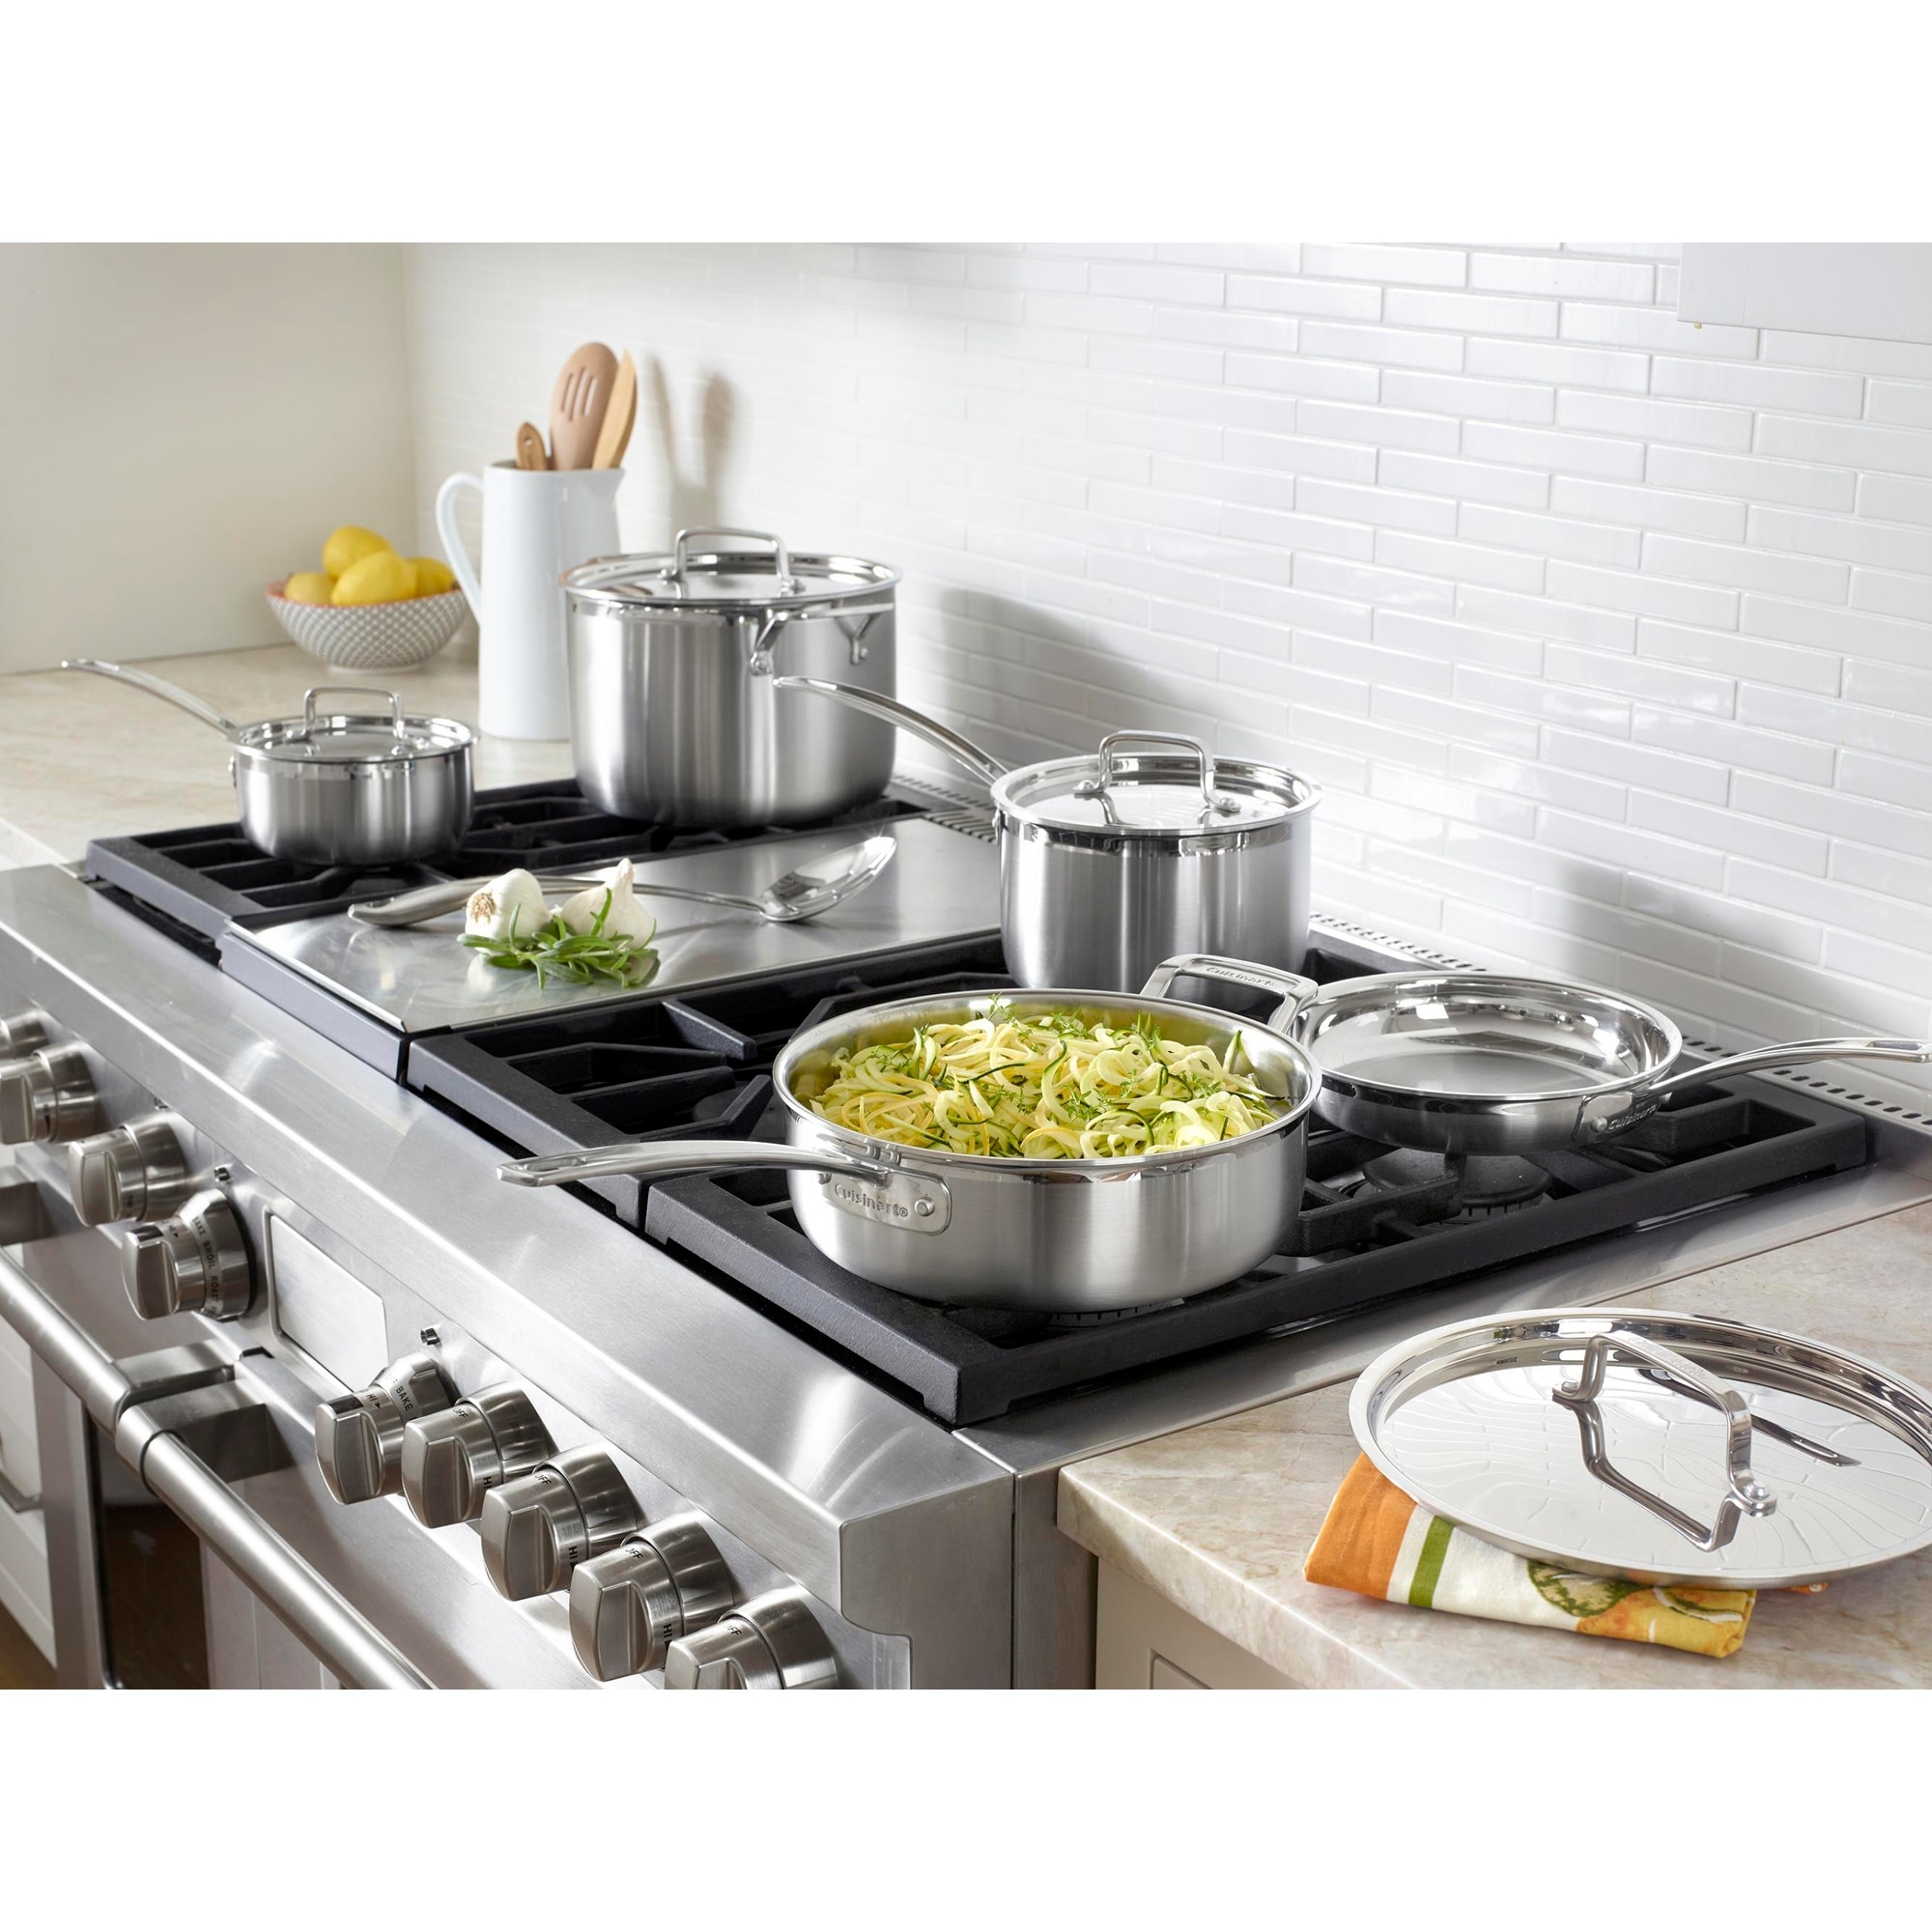 https://ak1.ostkcdn.com/images/products/is/images/direct/437fbf7782a8337948f8b467f59a72945f4419d7/Cuisinart-MultiClad-Pro-Triple-Ply-Stainless-Cookware-12-Piece-Set.jpg